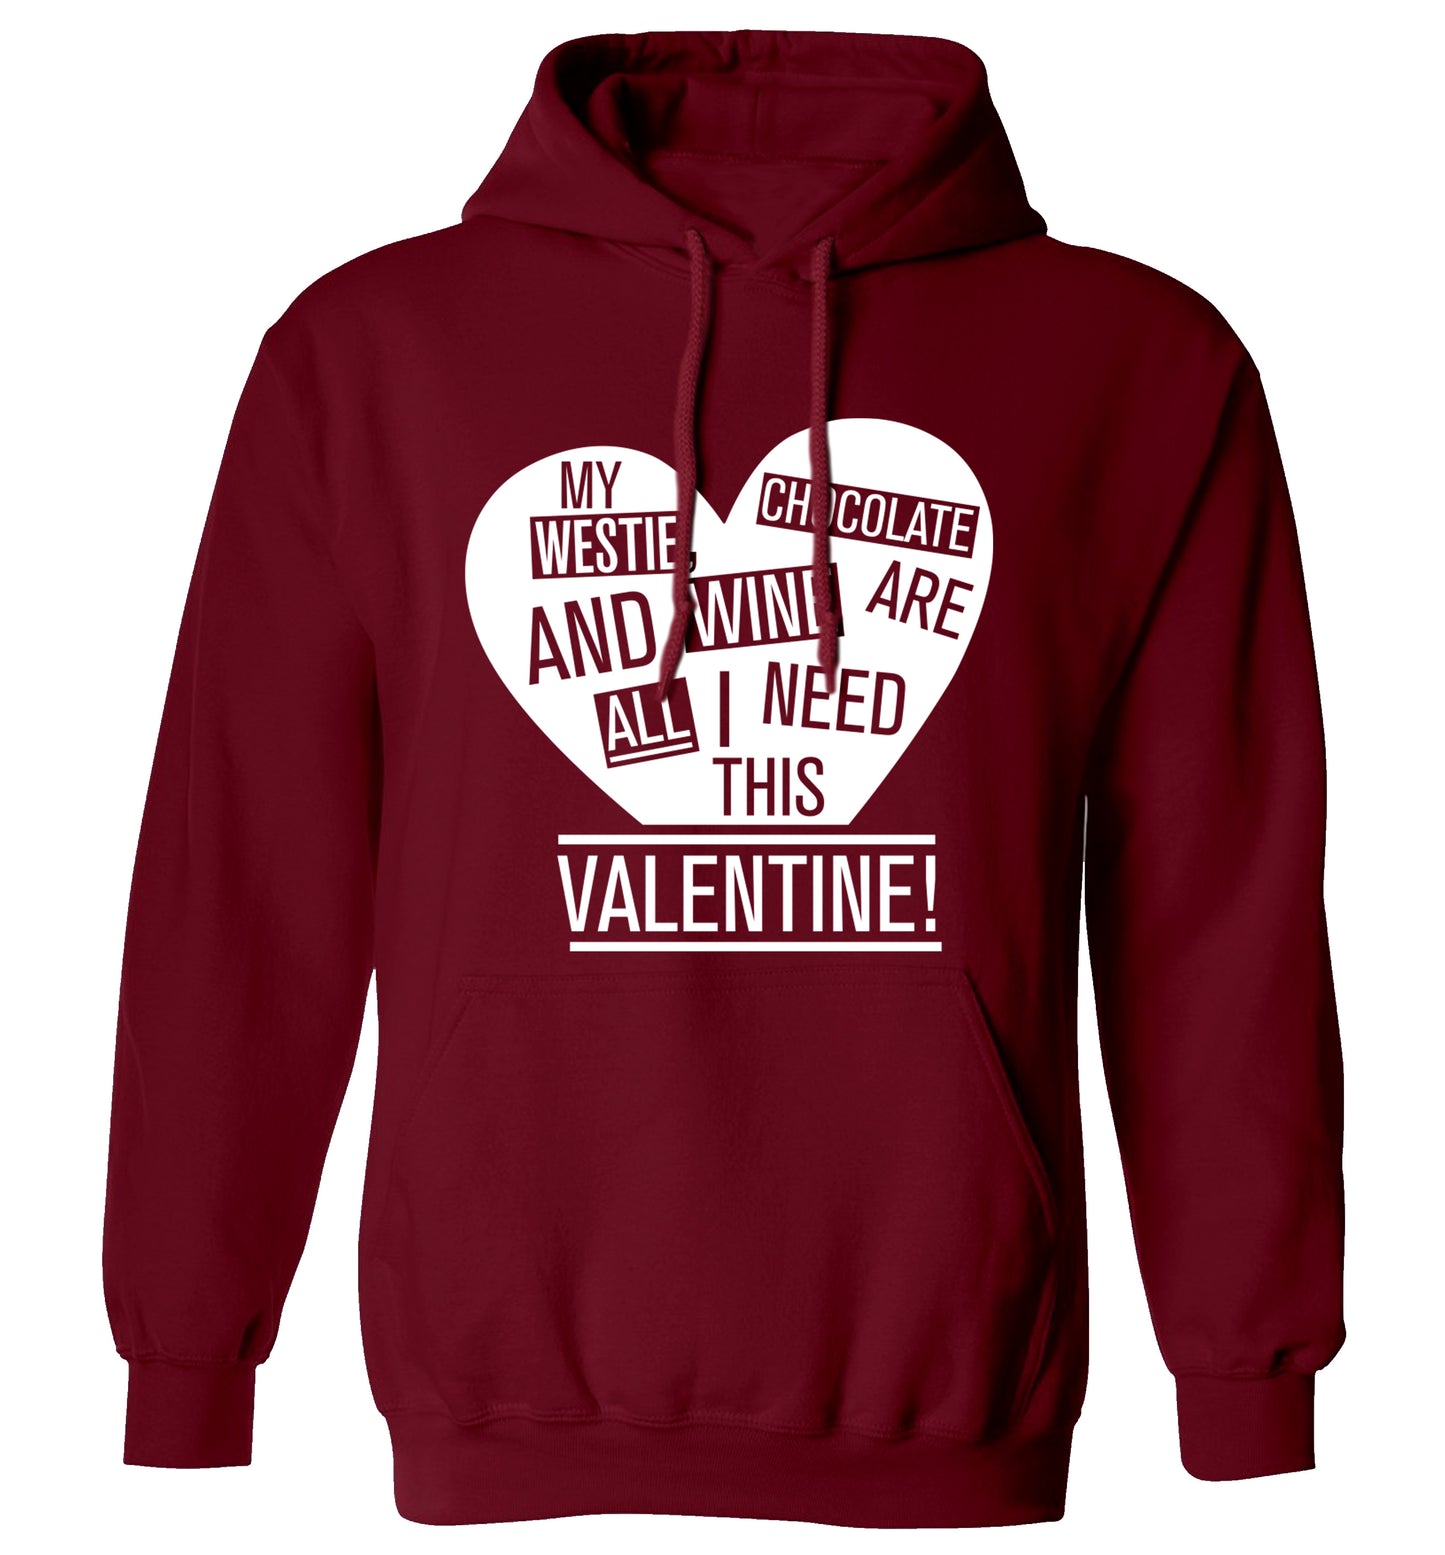 My westie, chocolate and wine are all I need this valentine! adults unisex maroon hoodie 2XL